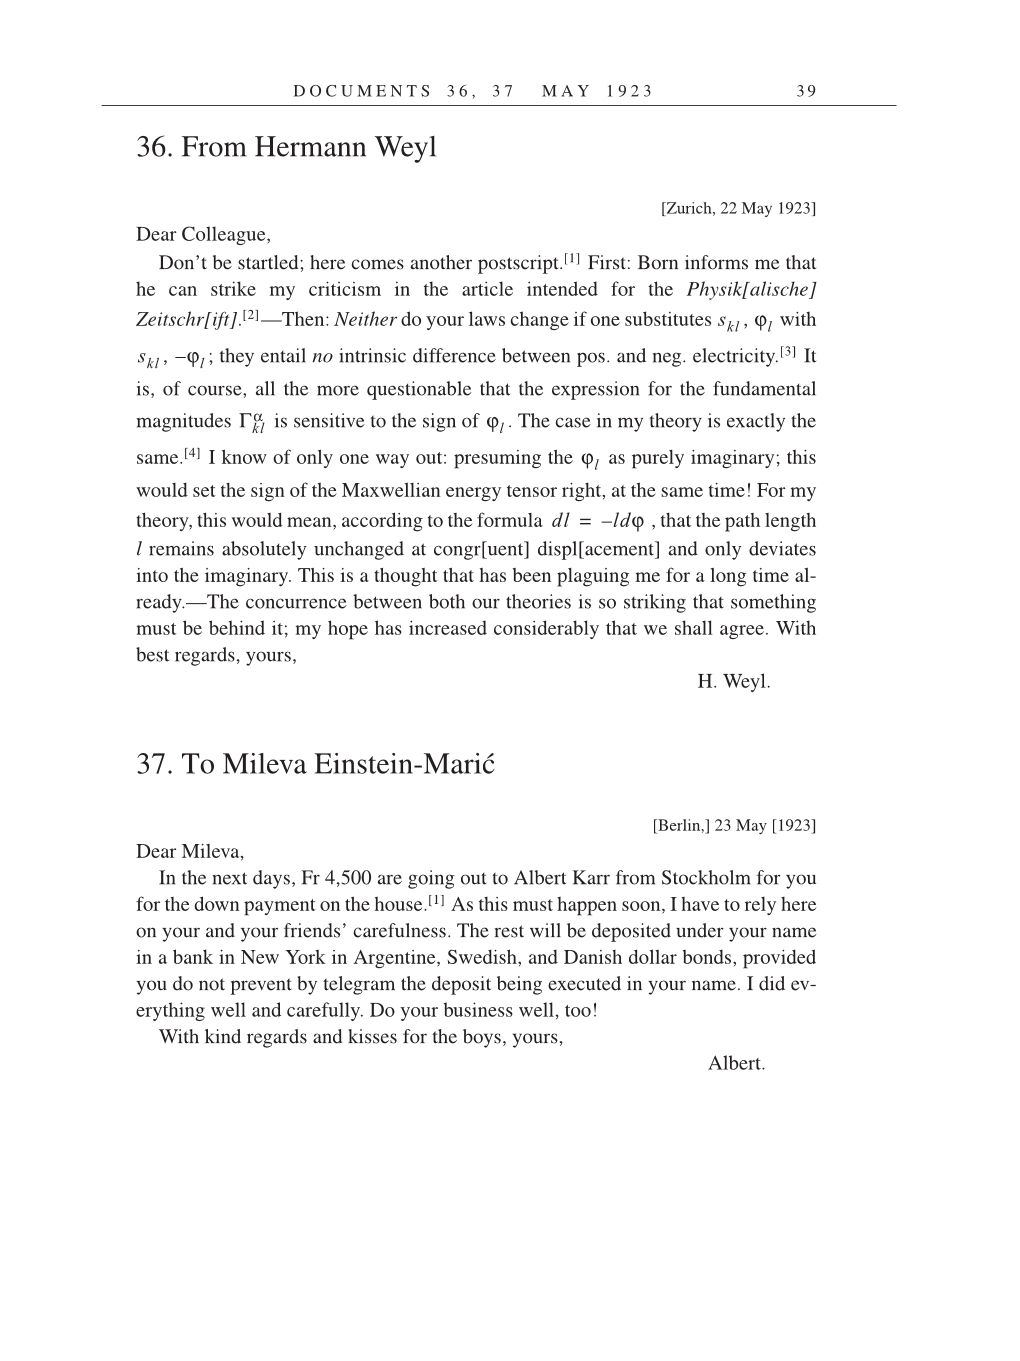 Volume 14: The Berlin Years: Writings & Correspondence, April 1923-May 1925 (English Translation Supplement) page 39